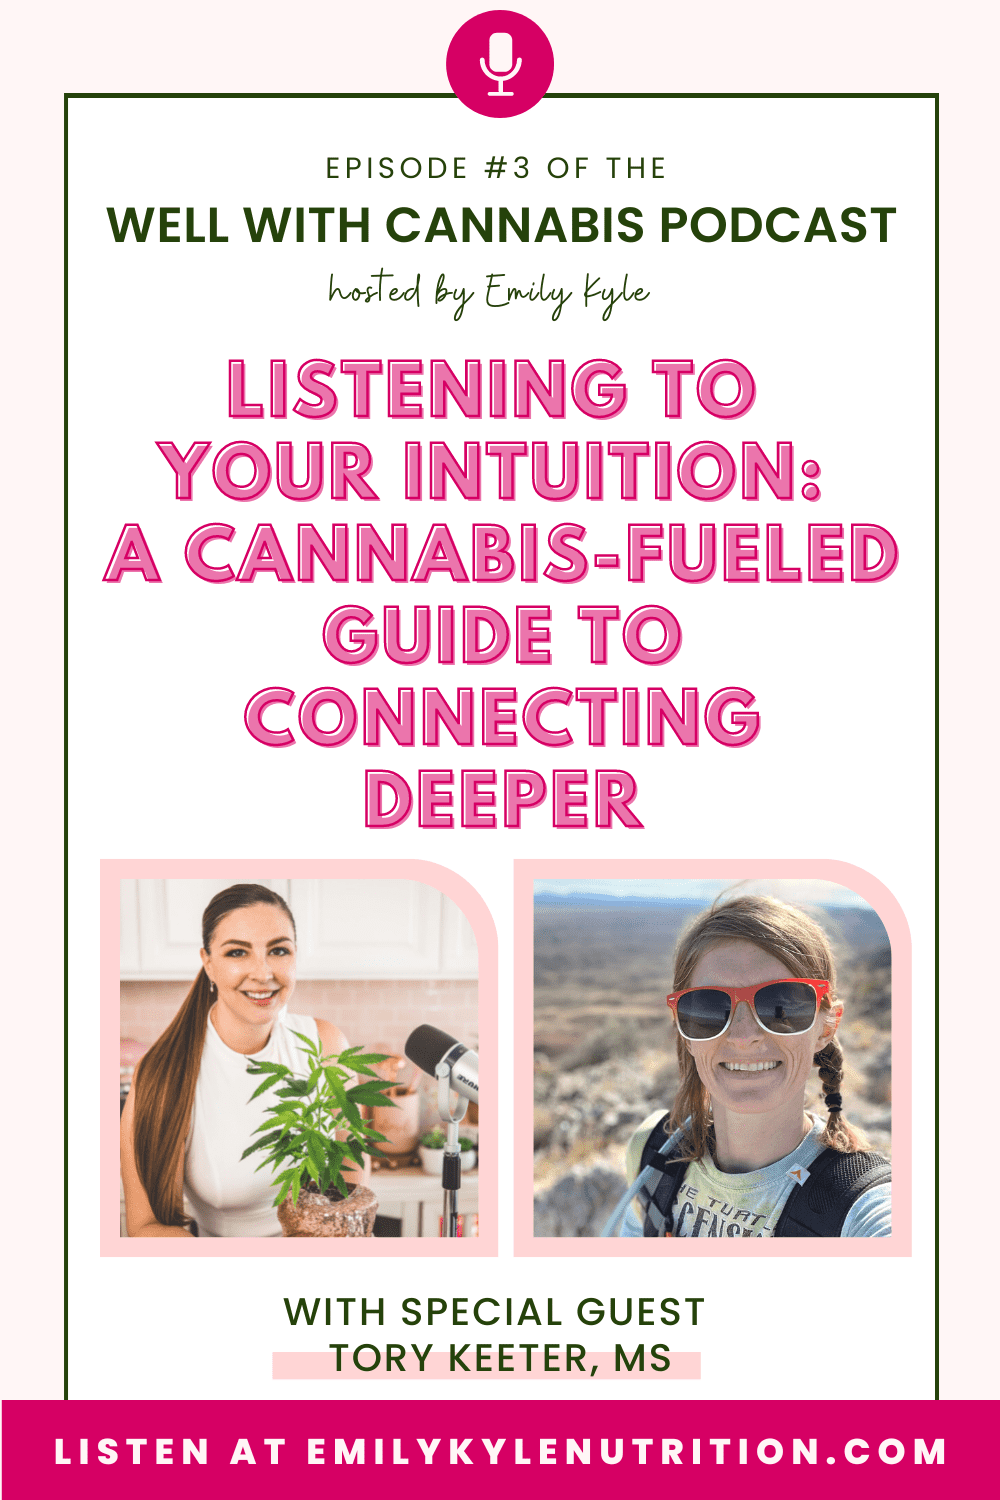 A pin for the Well With Cannabis Podcast with text that says E3: Listening to Your Intuition: A Cannabis-Fueled Guide to Connecting Deeper with special guest Tory Keeter. There is a headshot of both Tory and the Host Emily Kyle. 